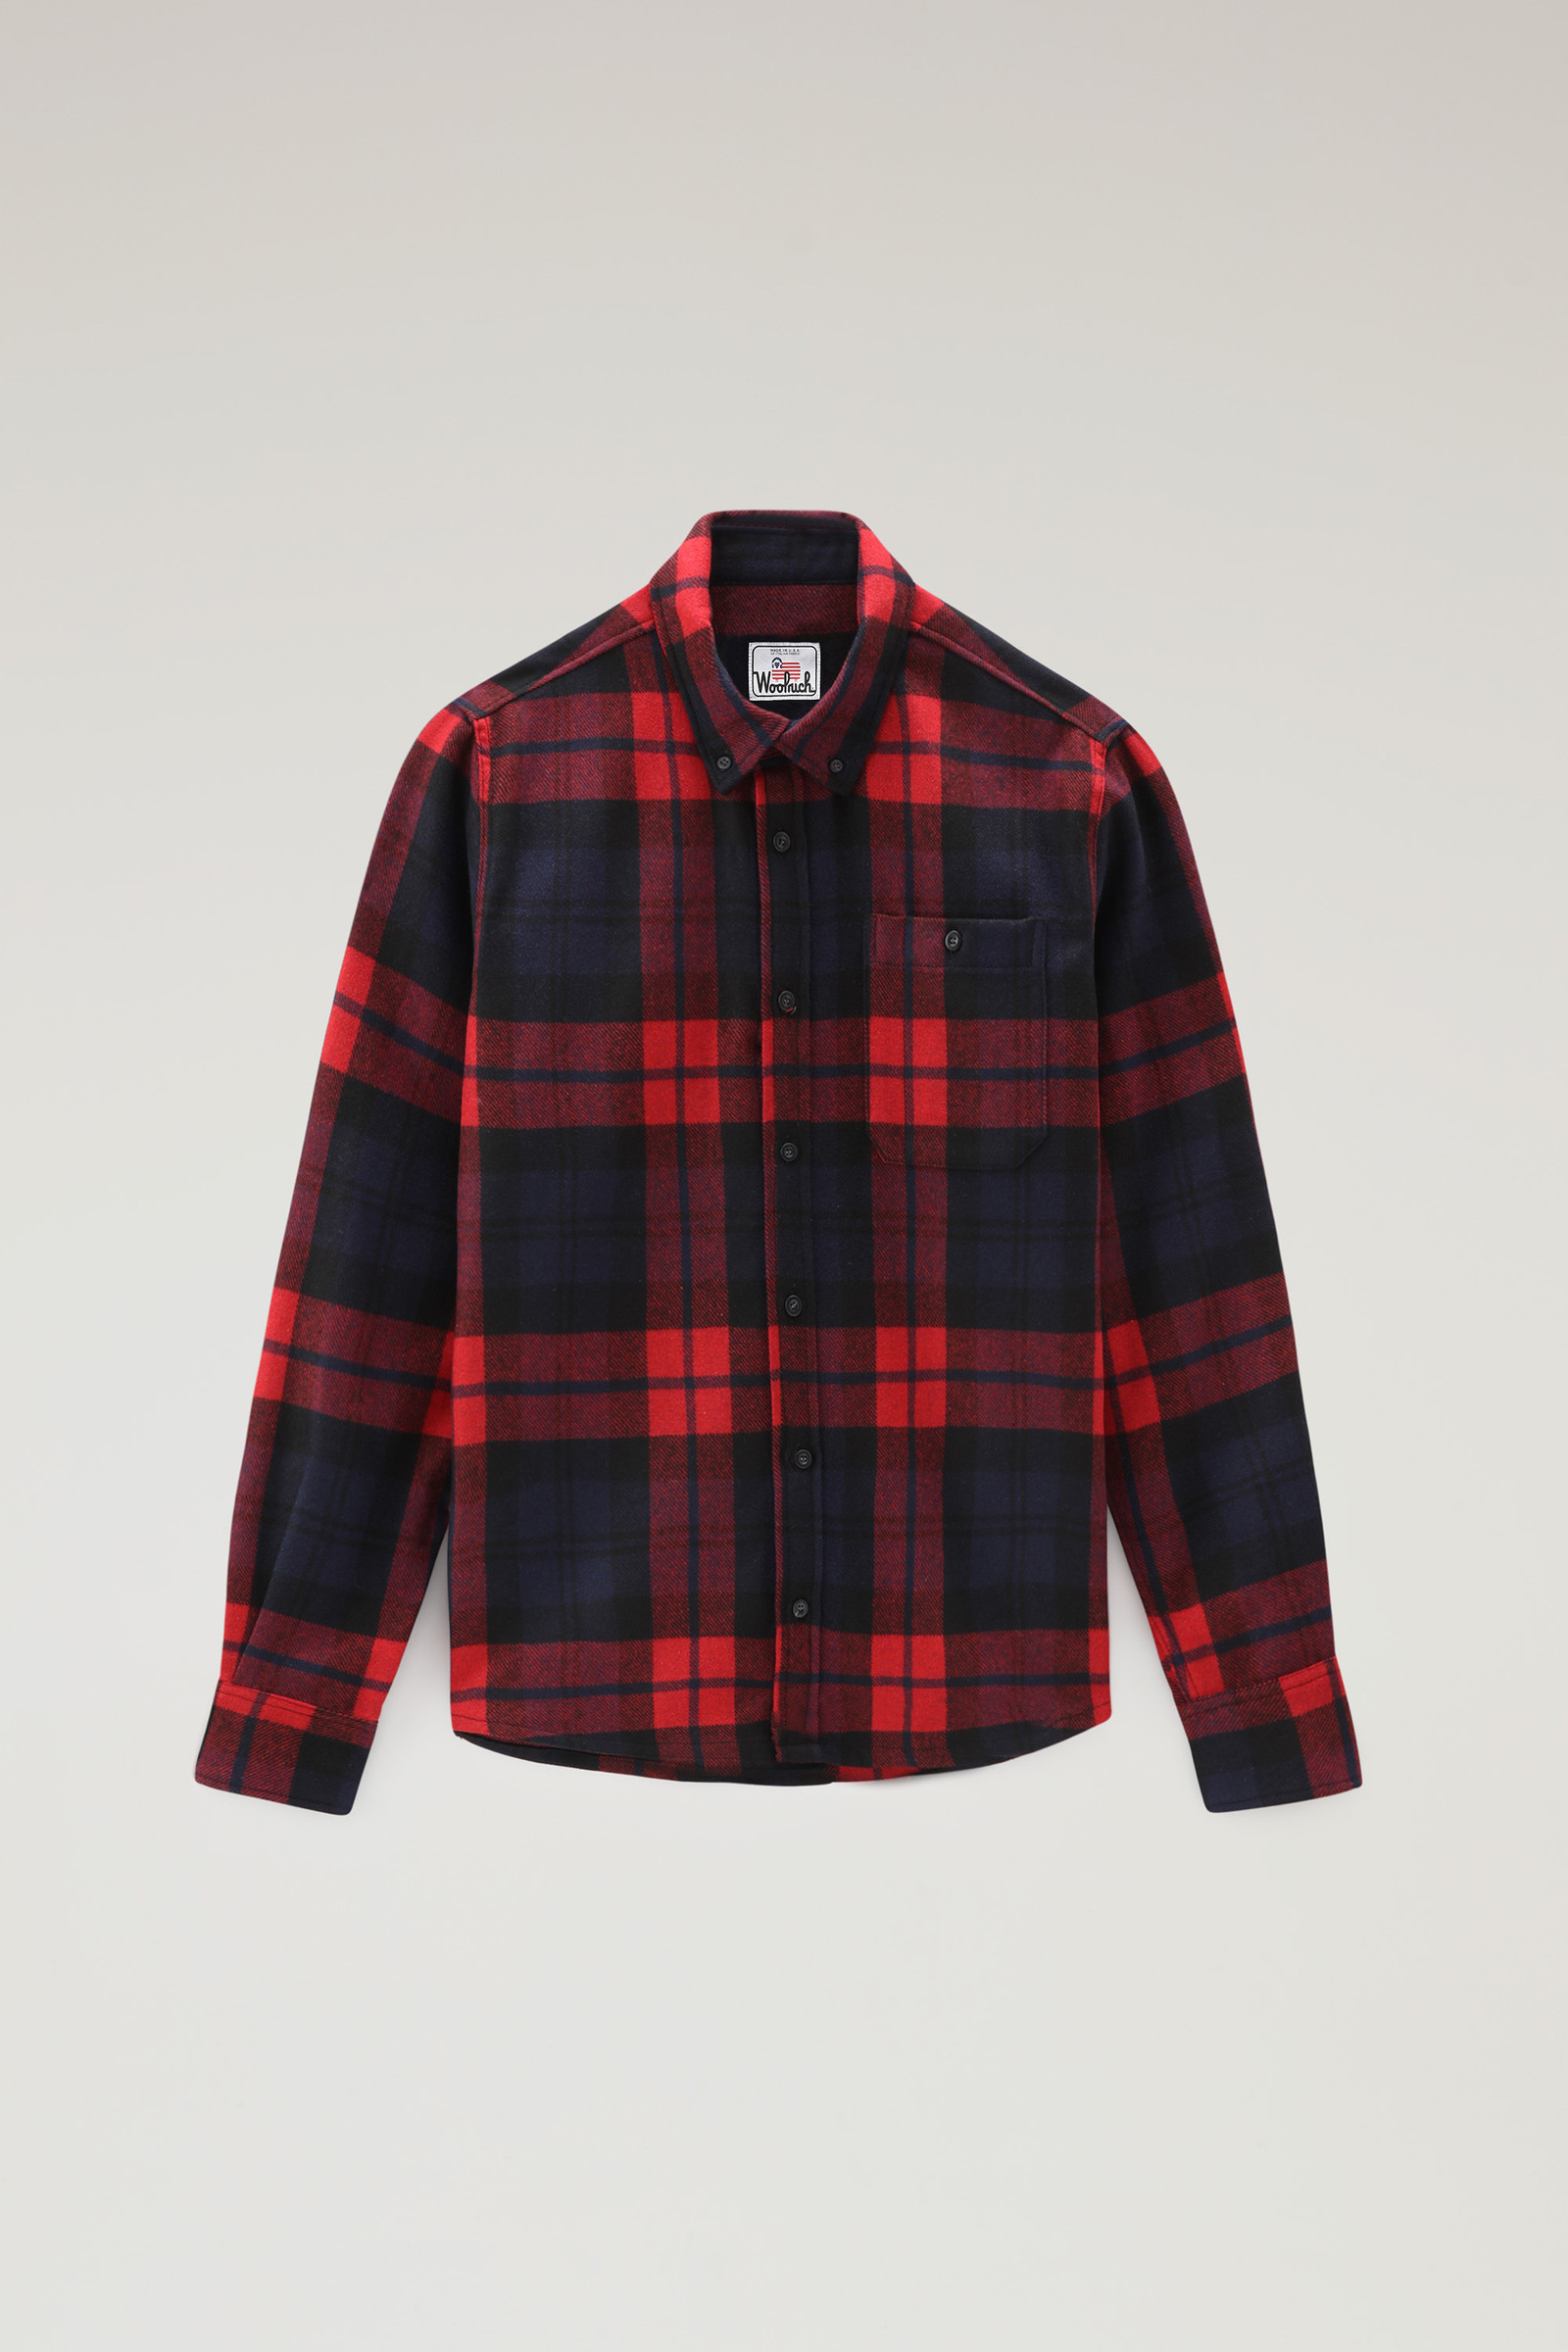 Flannel Button-Up Shirt for Tall Women in Red and Green Tartan